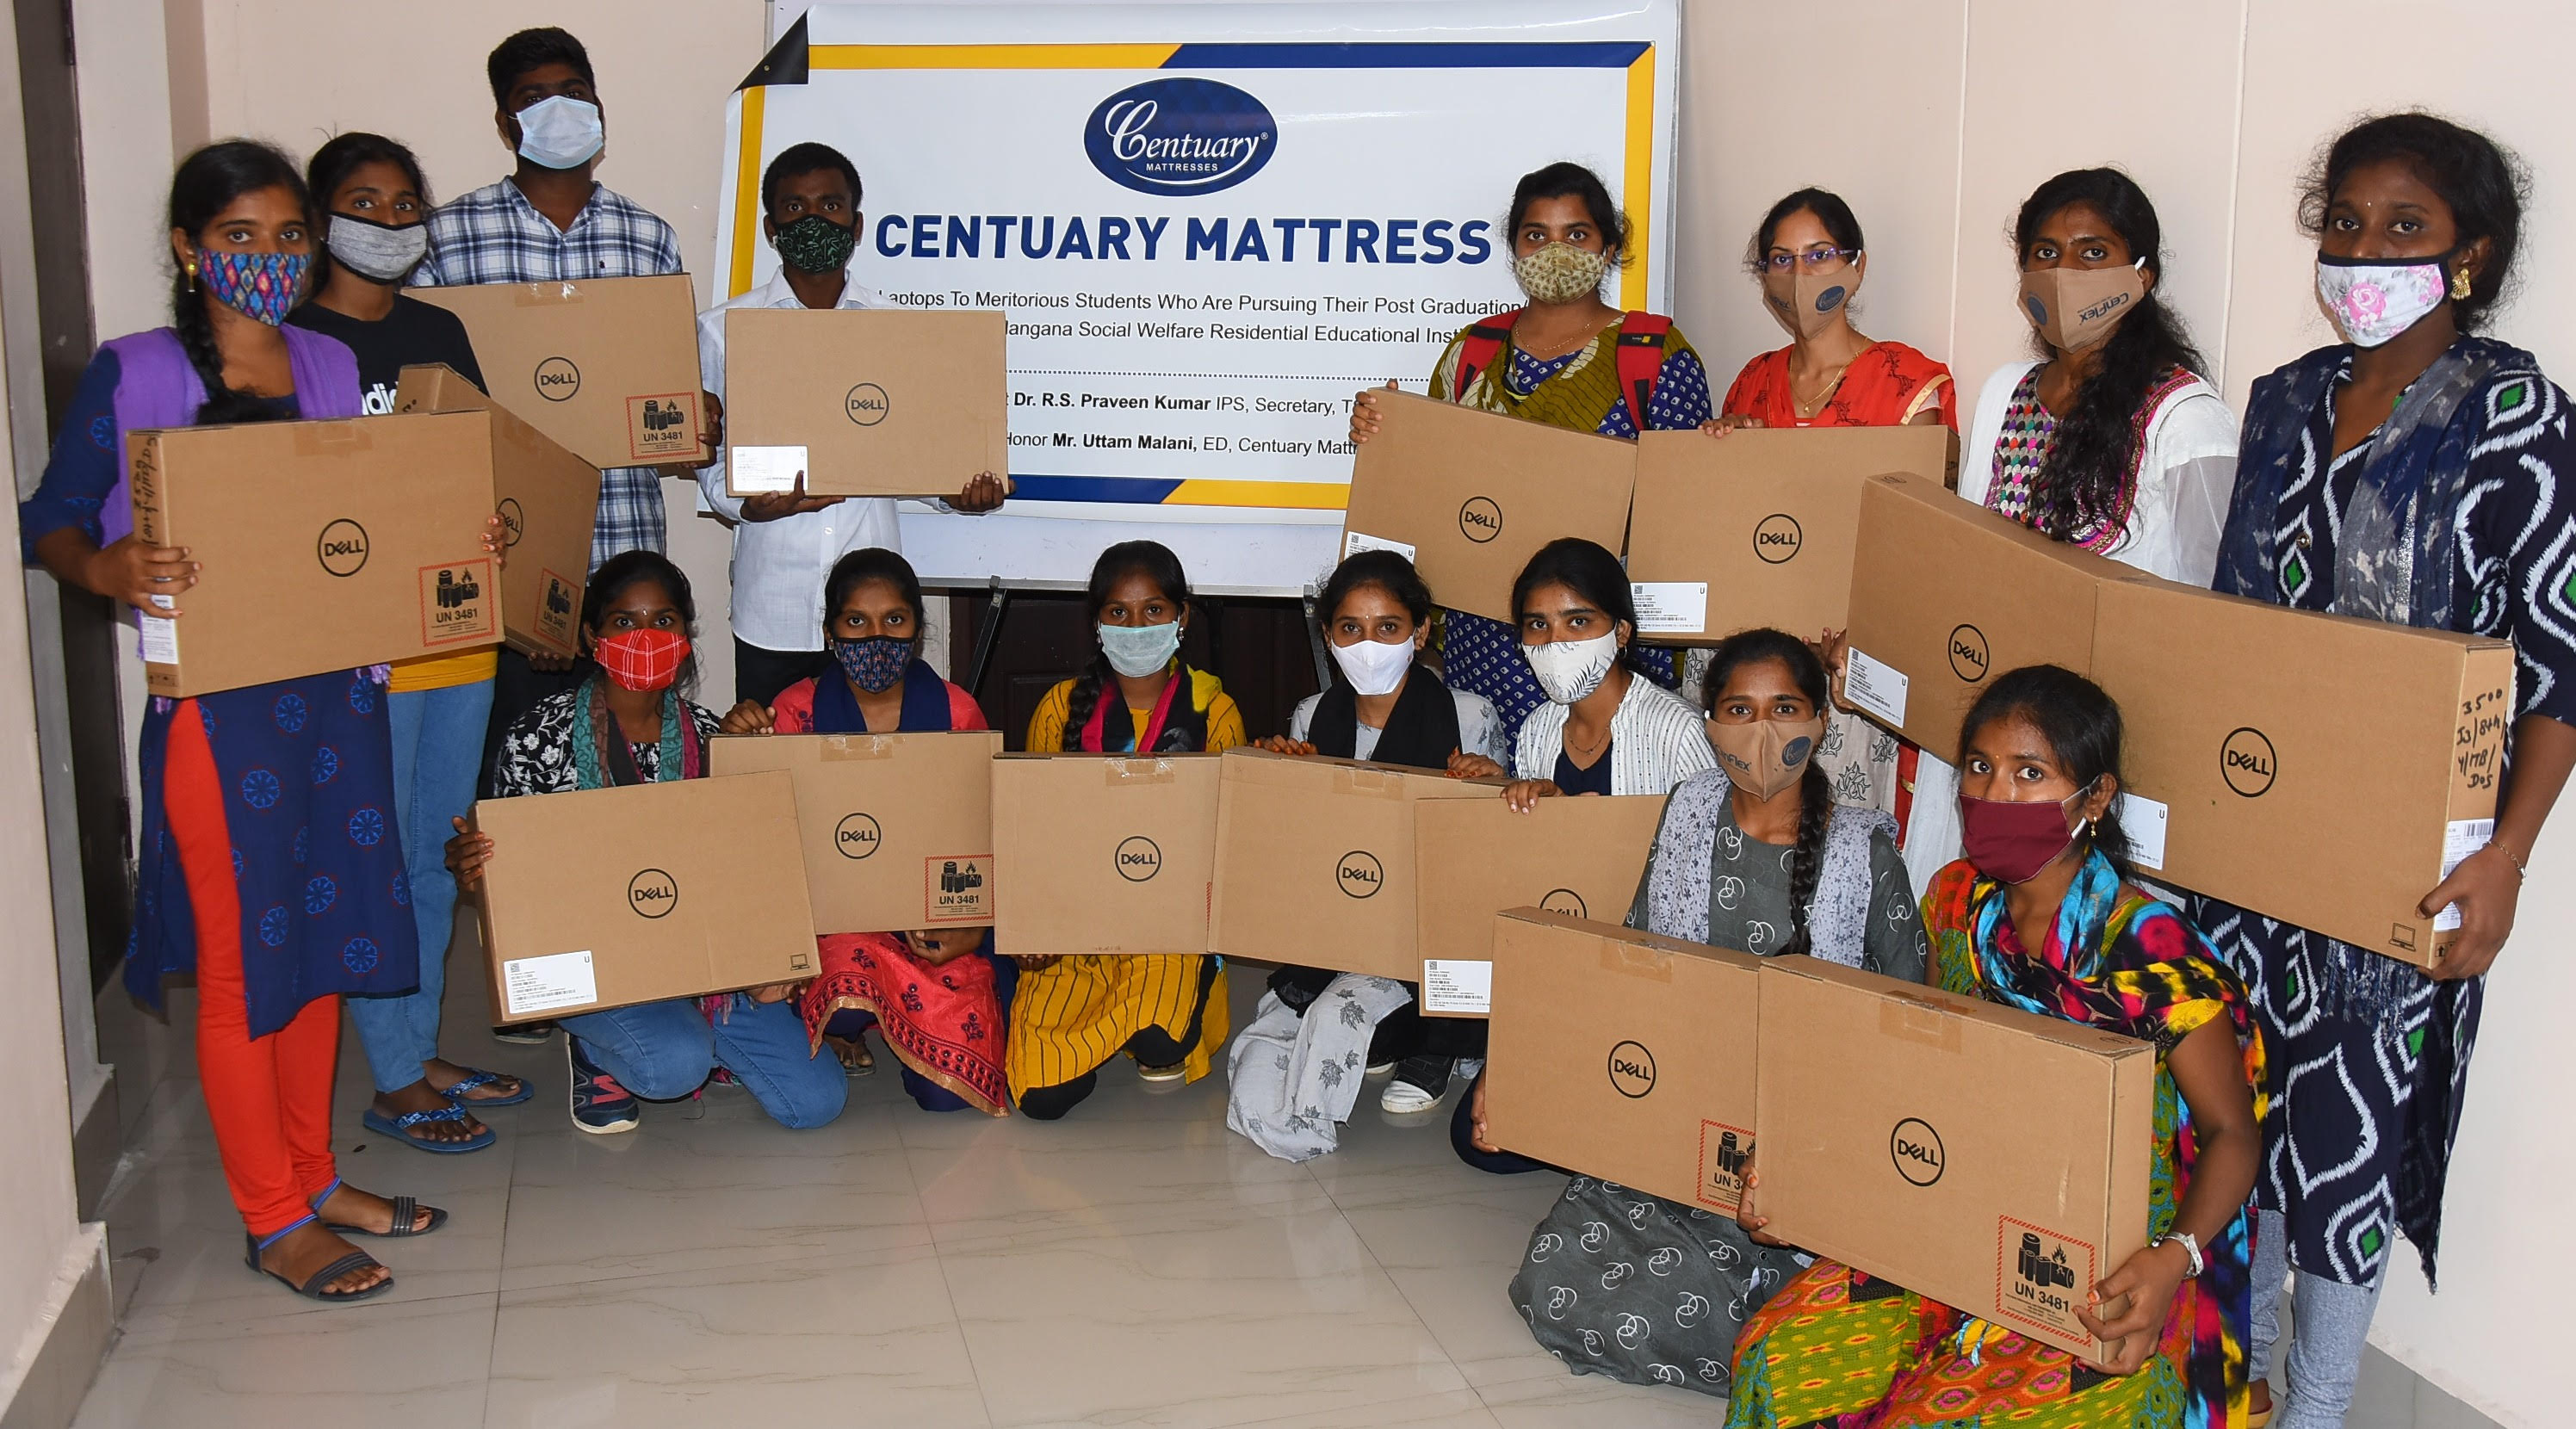 Shree Malani Group extends support to the underprivileged through  its Community Development Initiatives